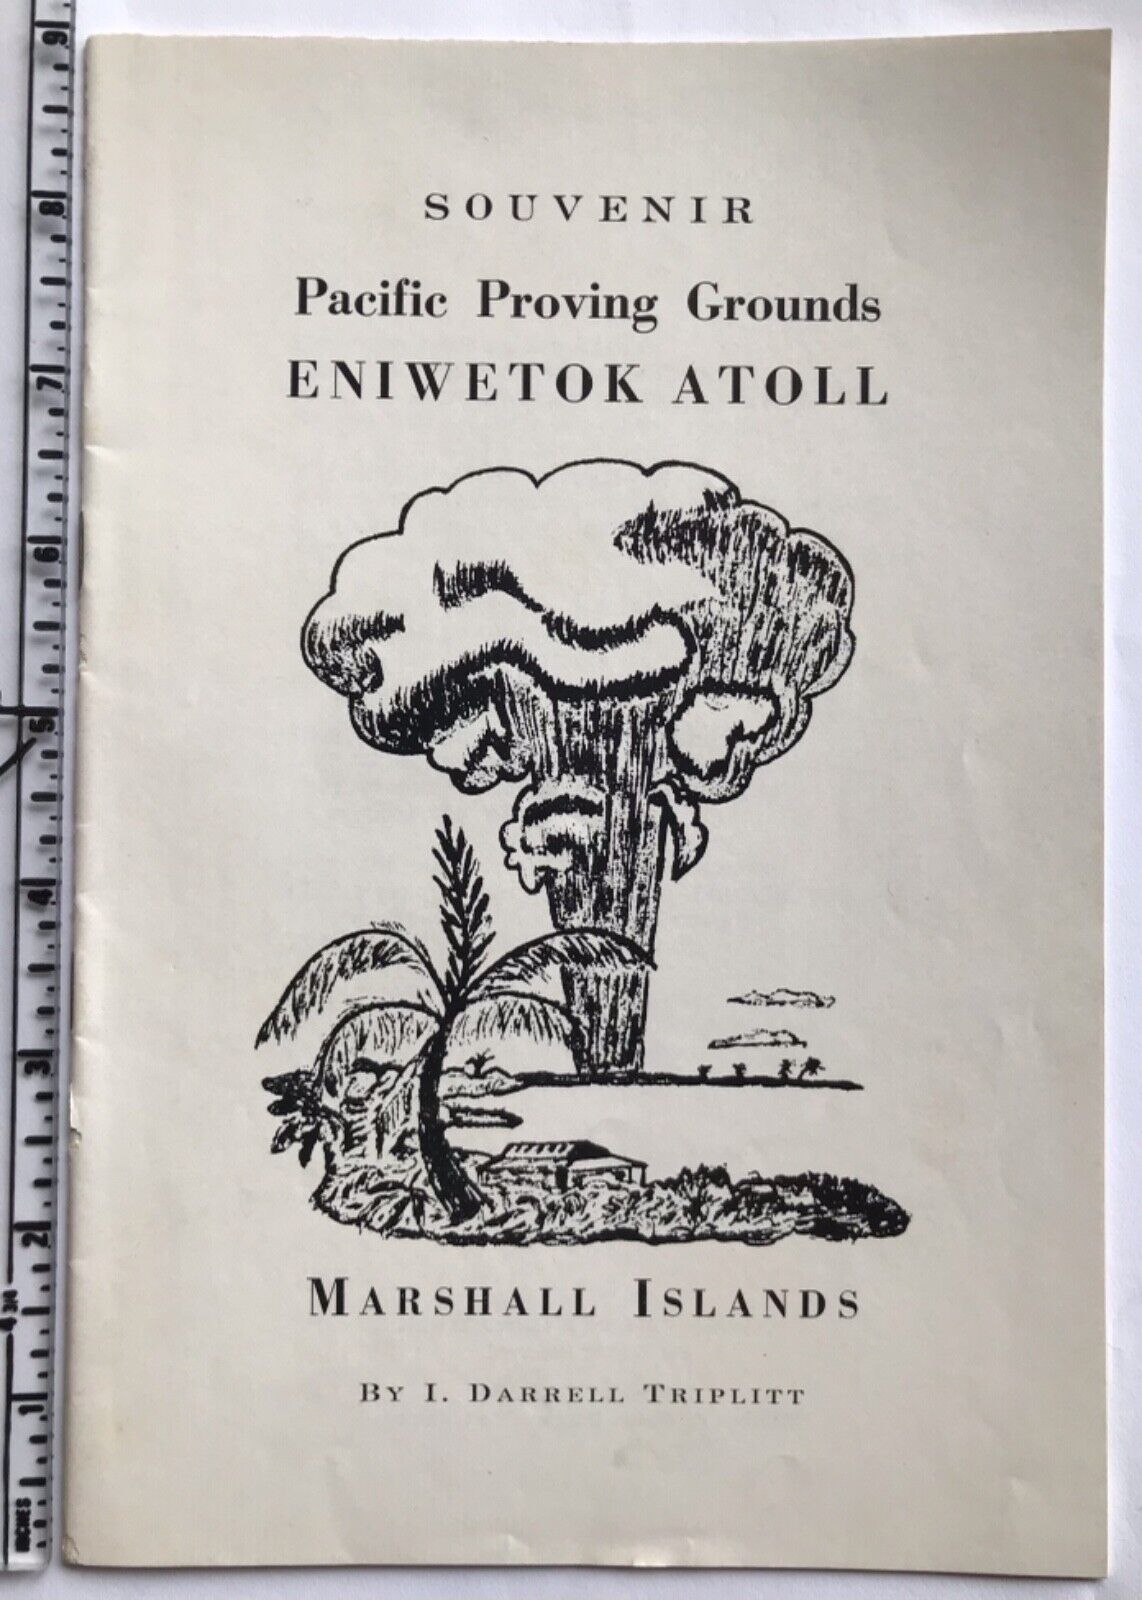 1954 Pacific Proving Grounds ENIWETOK ATOLL MARSHALL ISLANDS Atomic Bomb REDWING